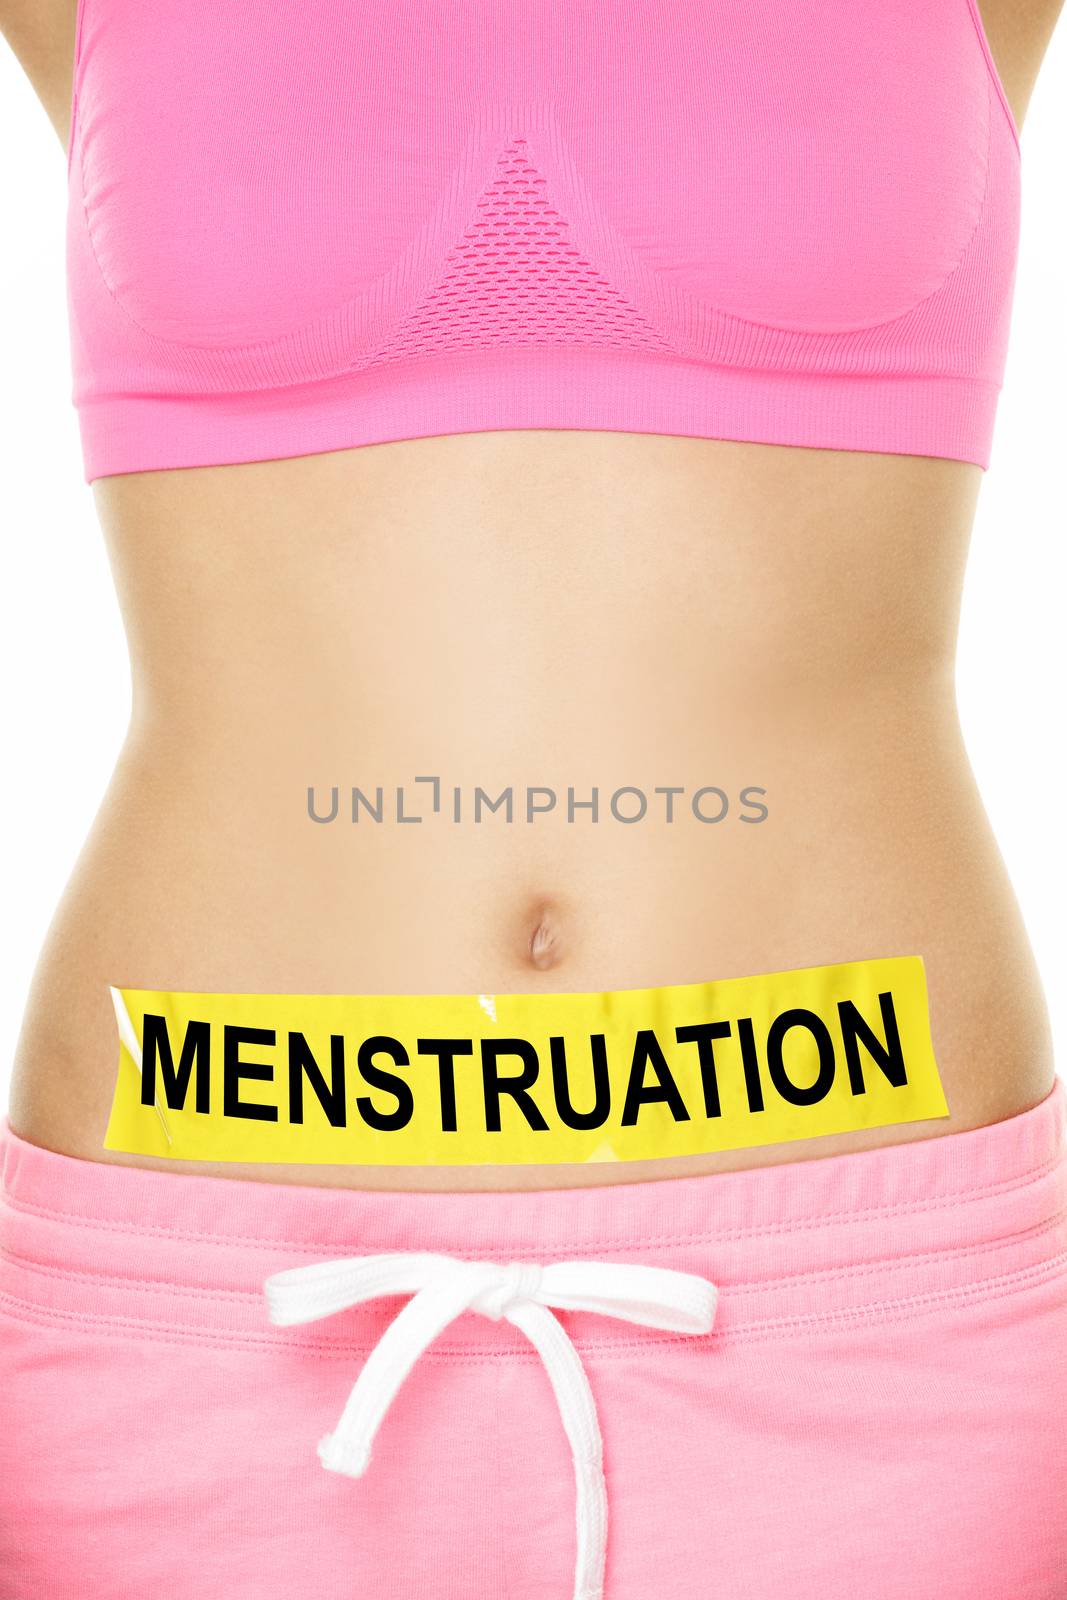 Menstruation. Conceptual Bare Woman Belly with Menstruation Text on Yellow Tape, Isolated on White Background.